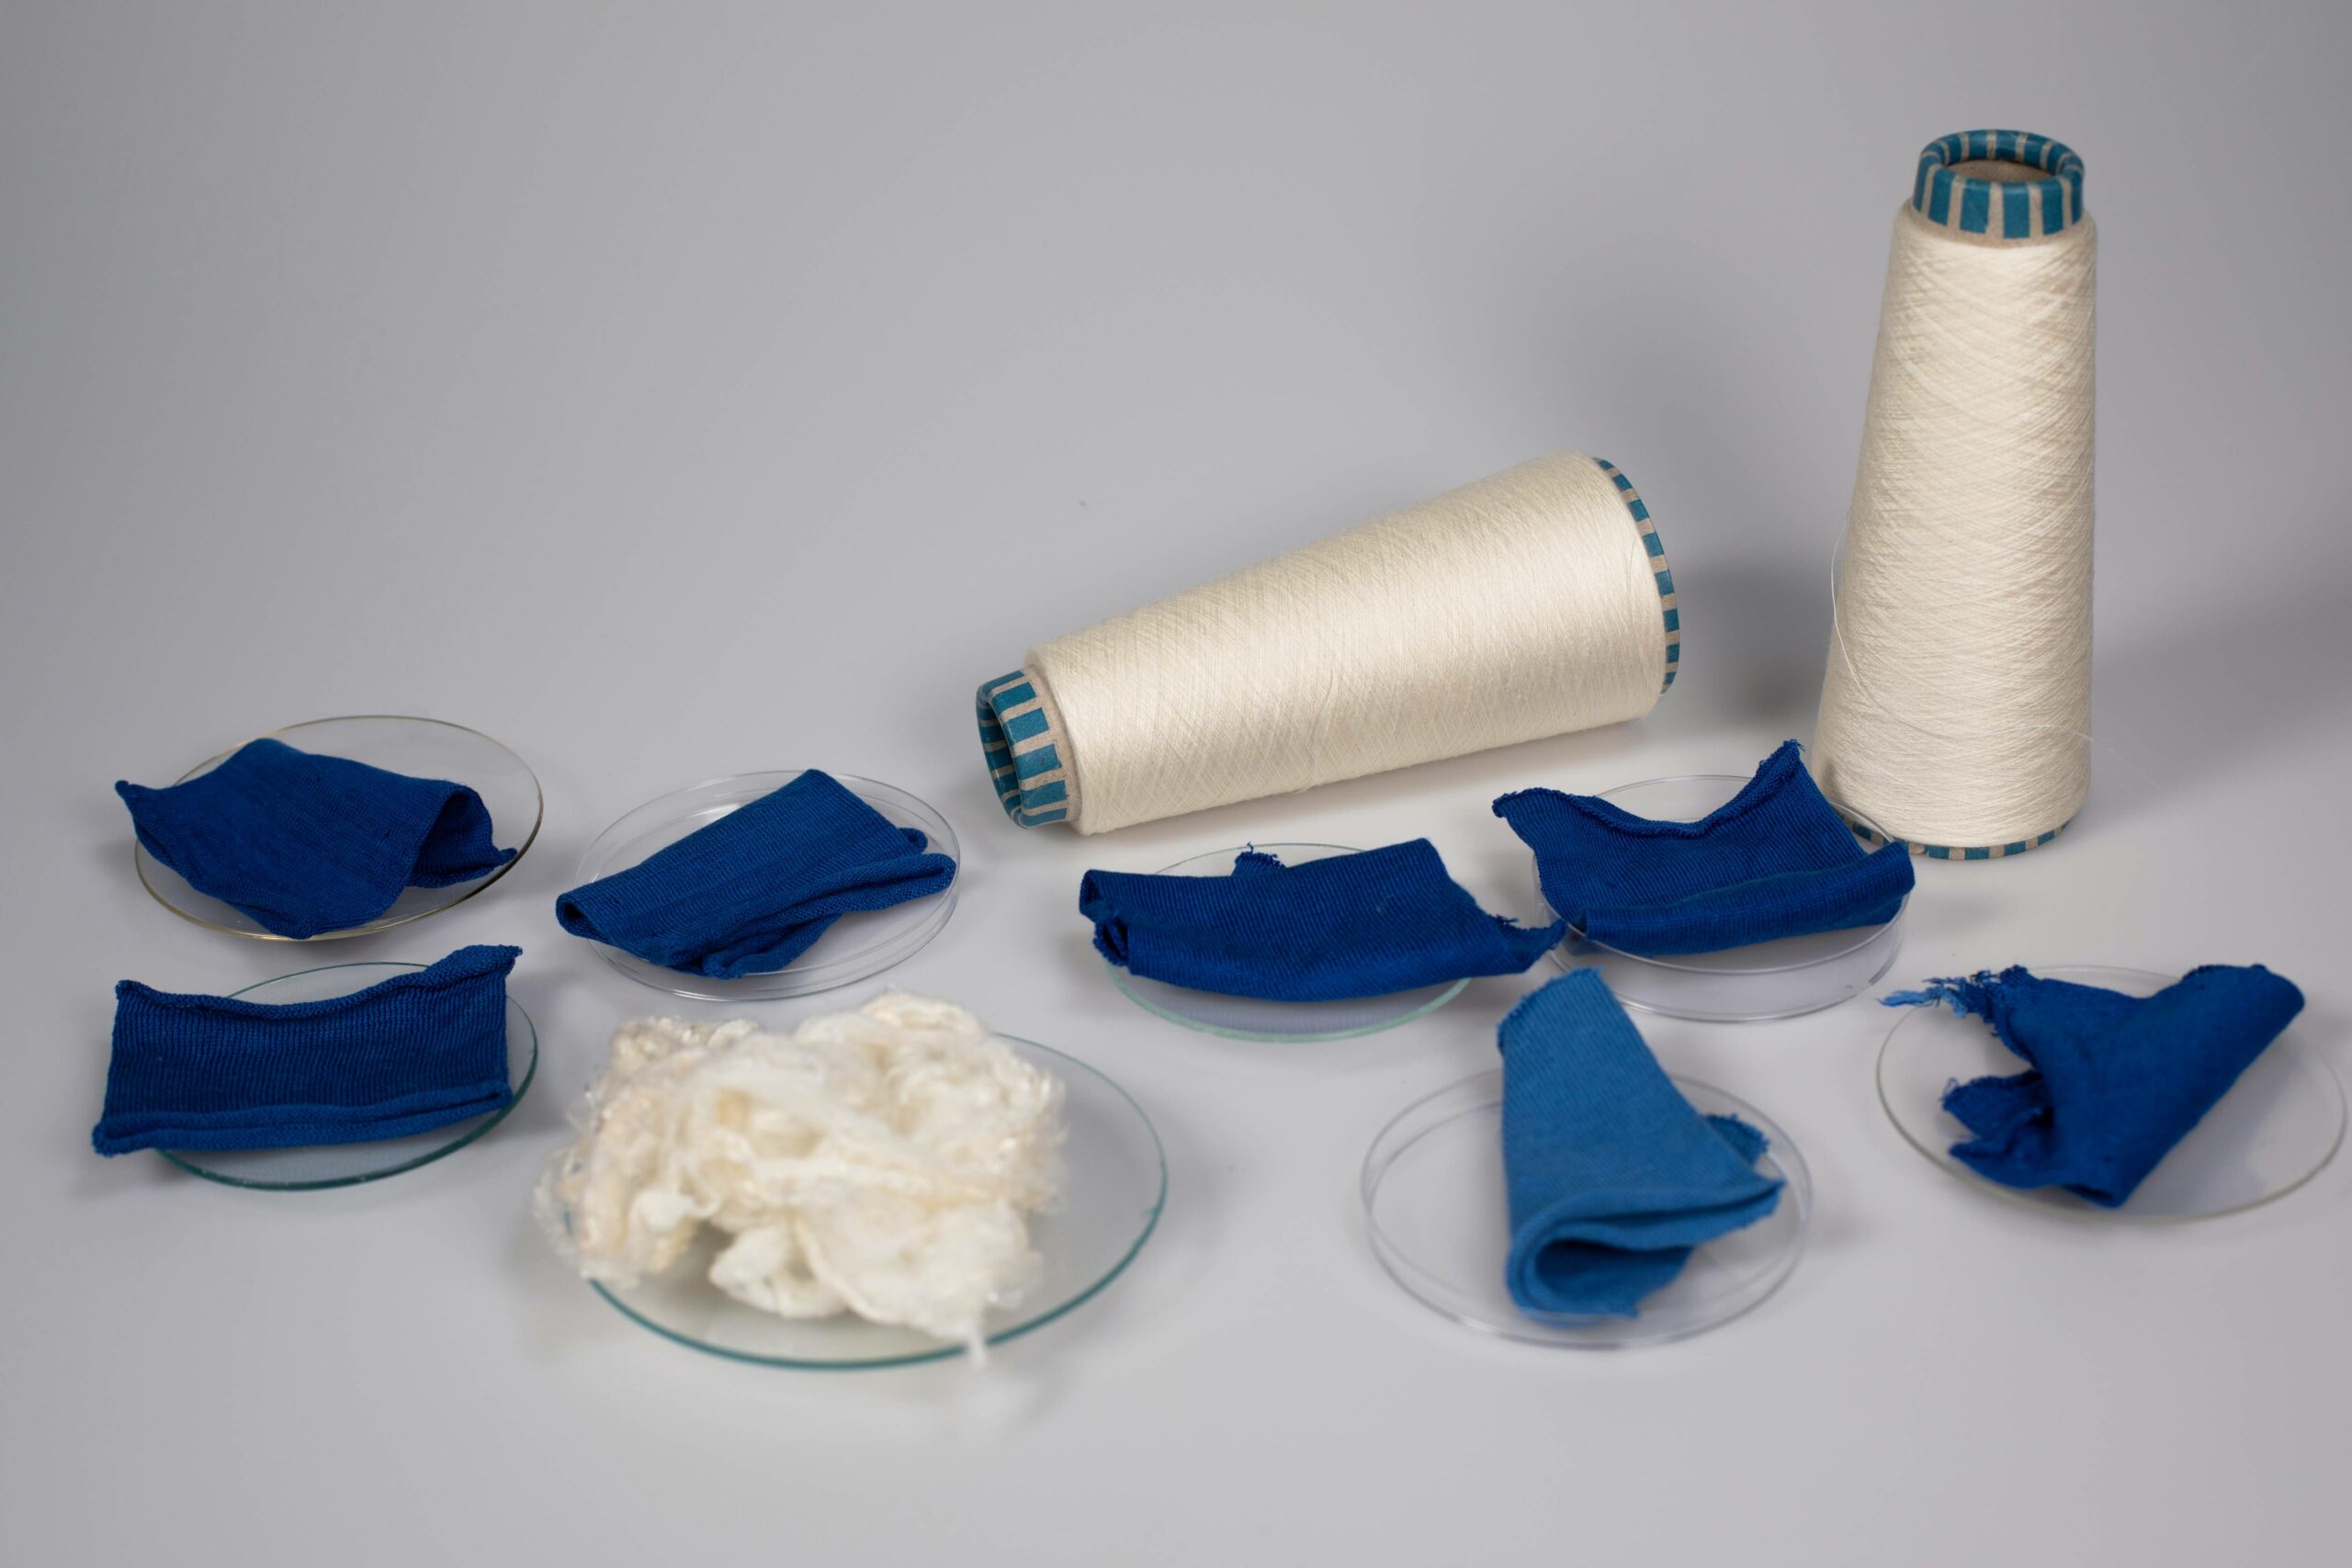 FinnFiberColor project took important steps towards a better overall understanding of the market potential of novel textile fibres